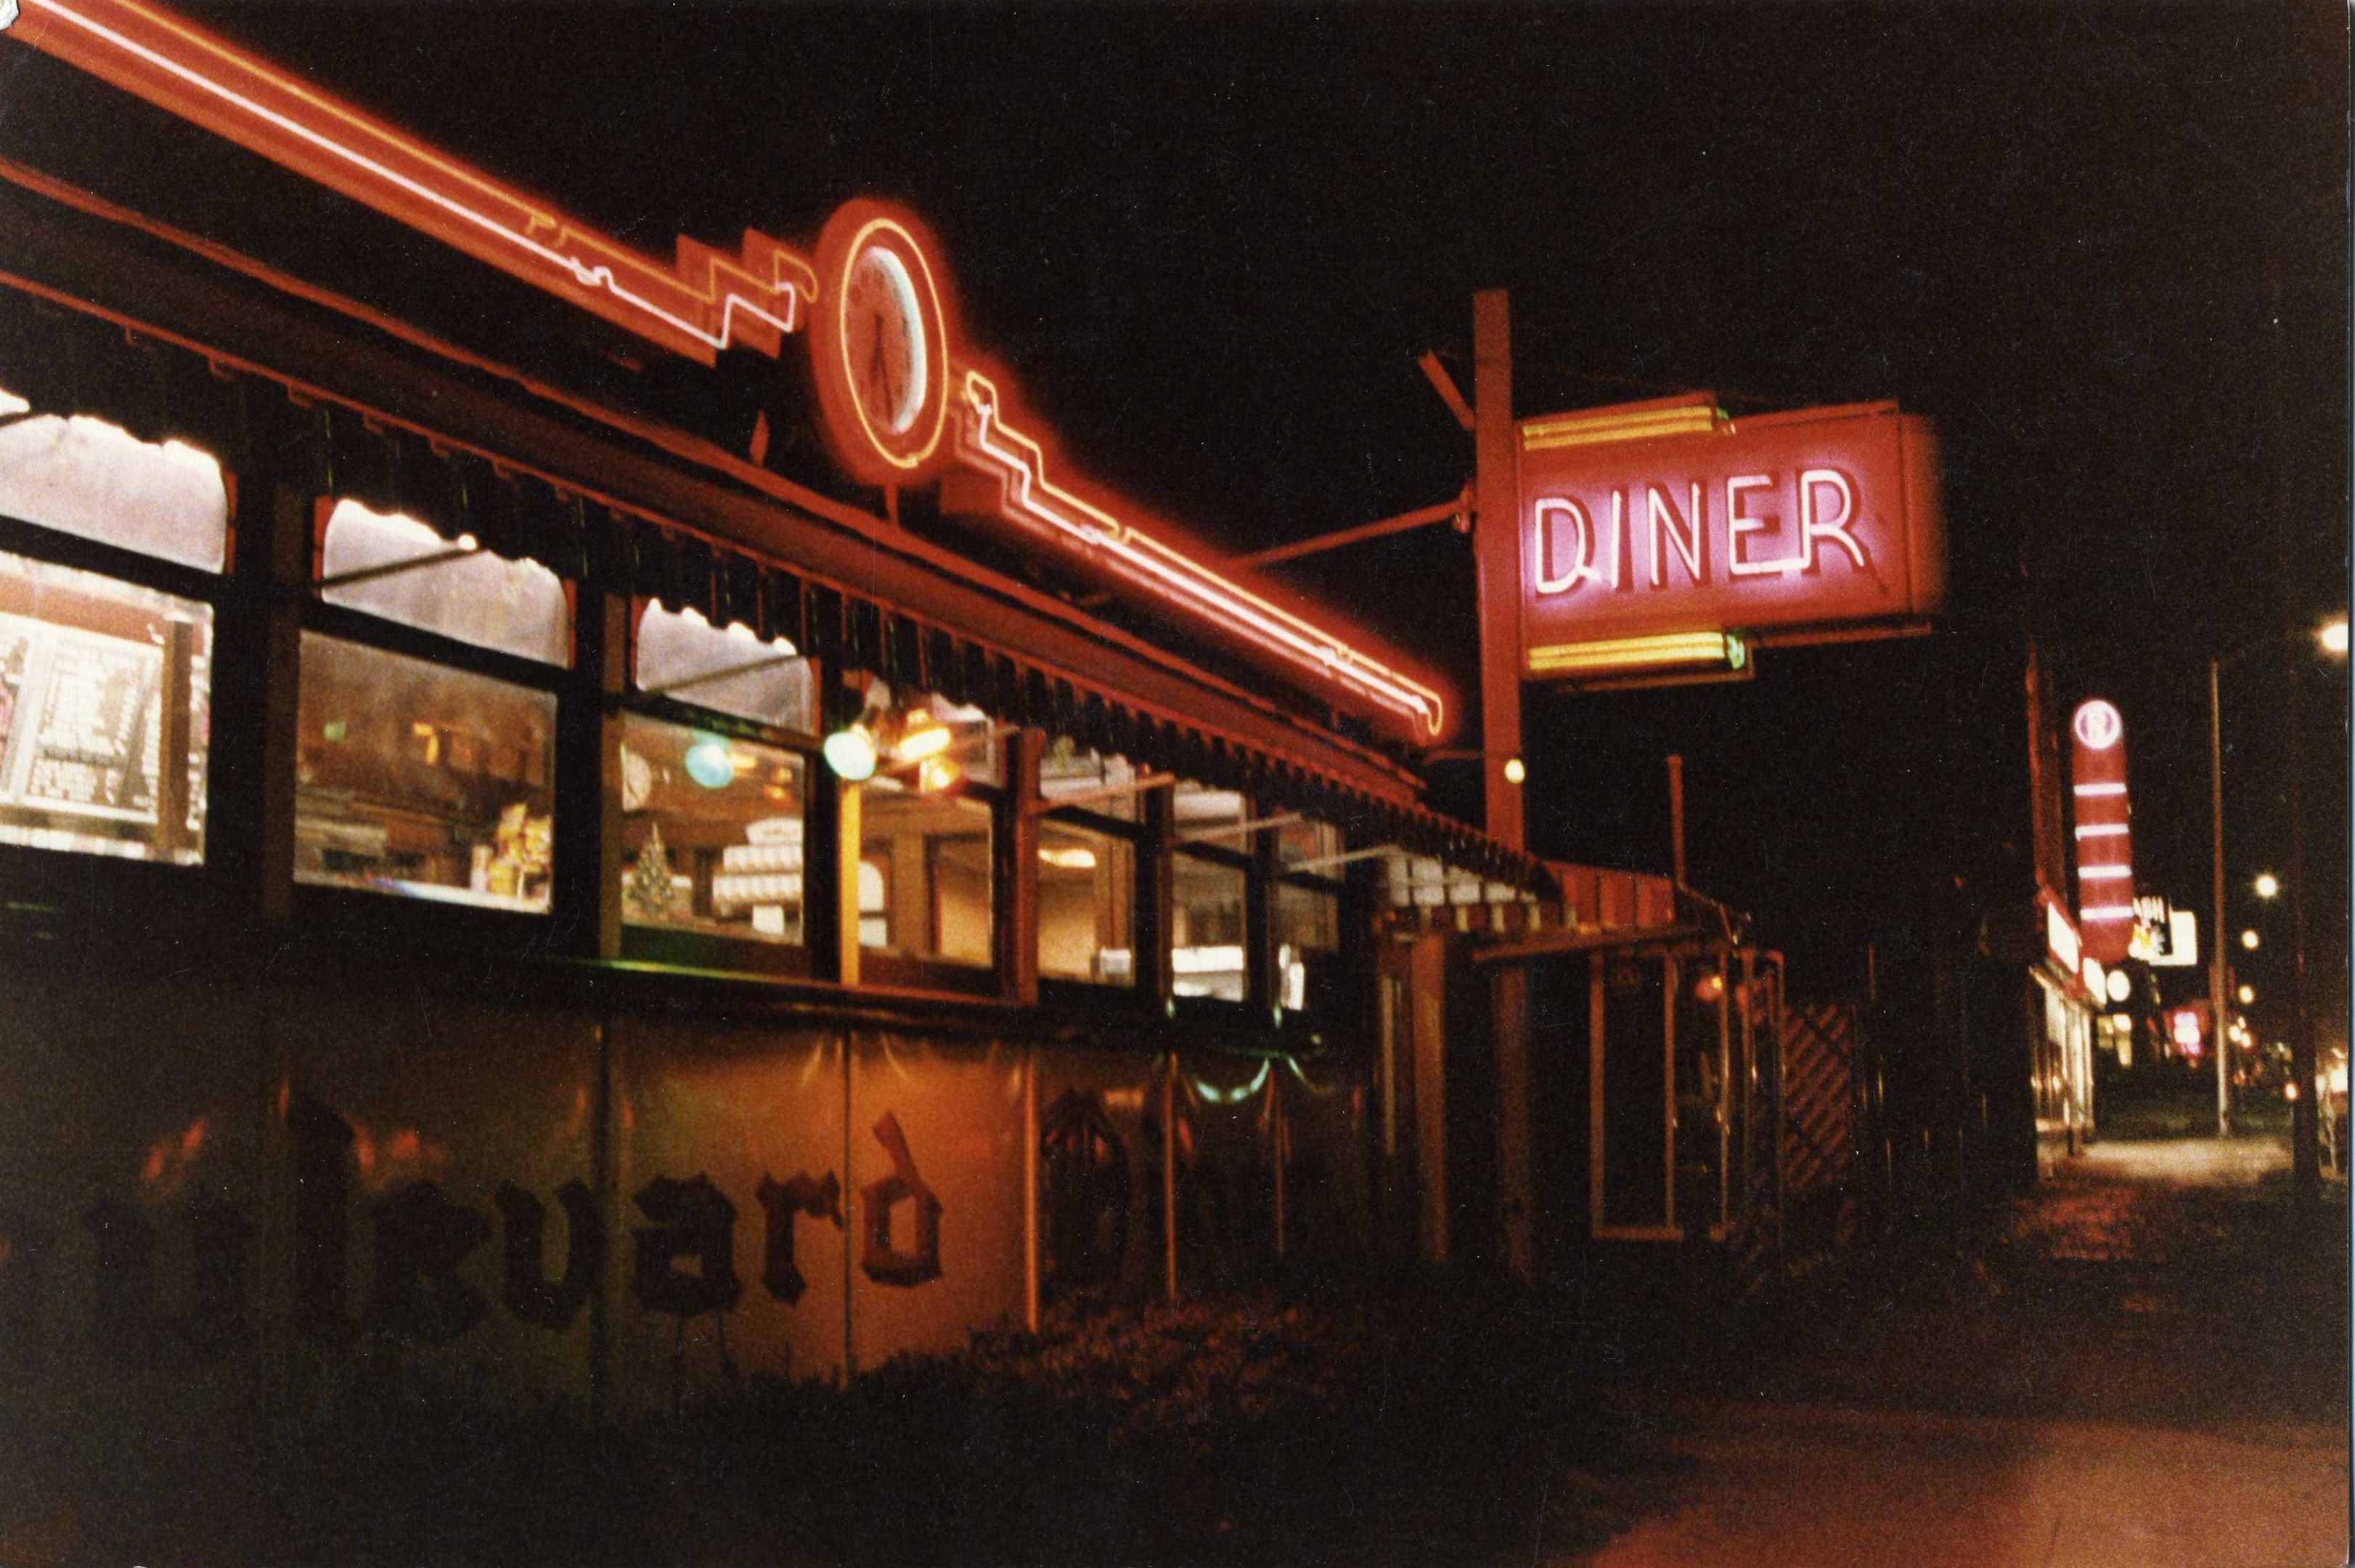 An old, original photo of the Boulevard Diner in Worcester